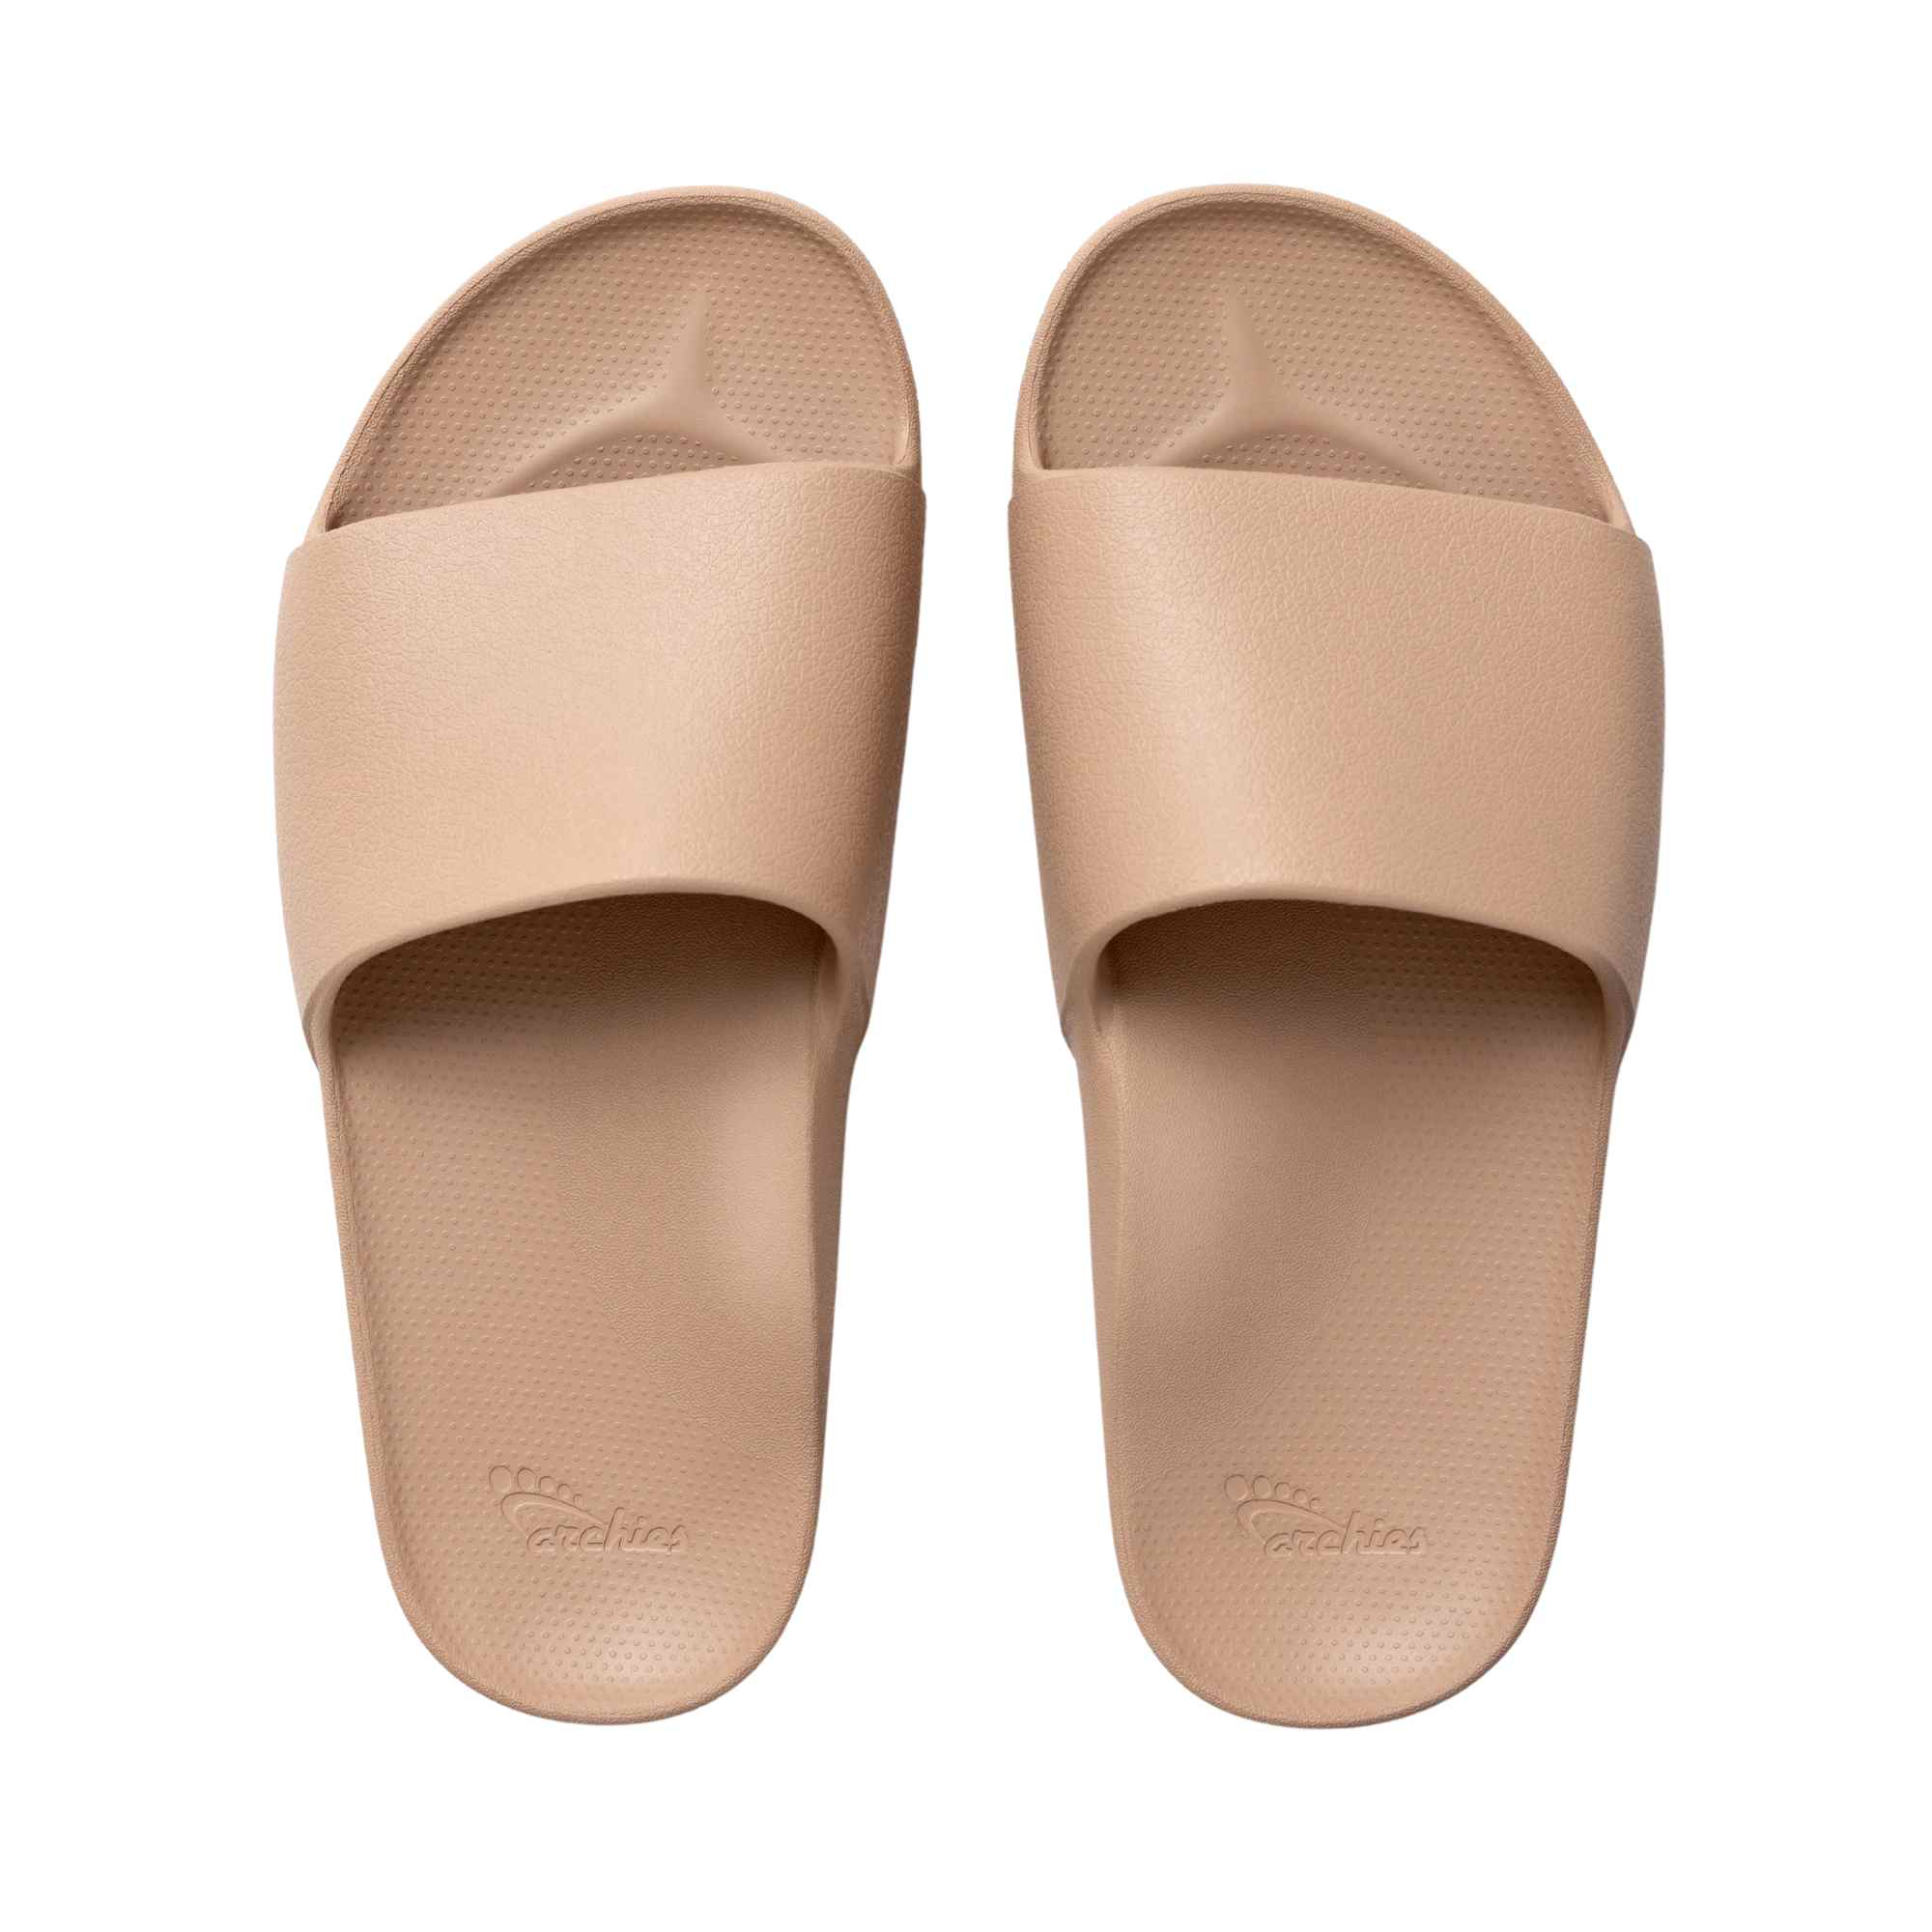 Archies Footwear on Instagram: AMERICA - we have just LAUNCHED our Archies  Arch Support Slides! After 1000's of requests we are SO excited to release  a very limited first batch of Archies